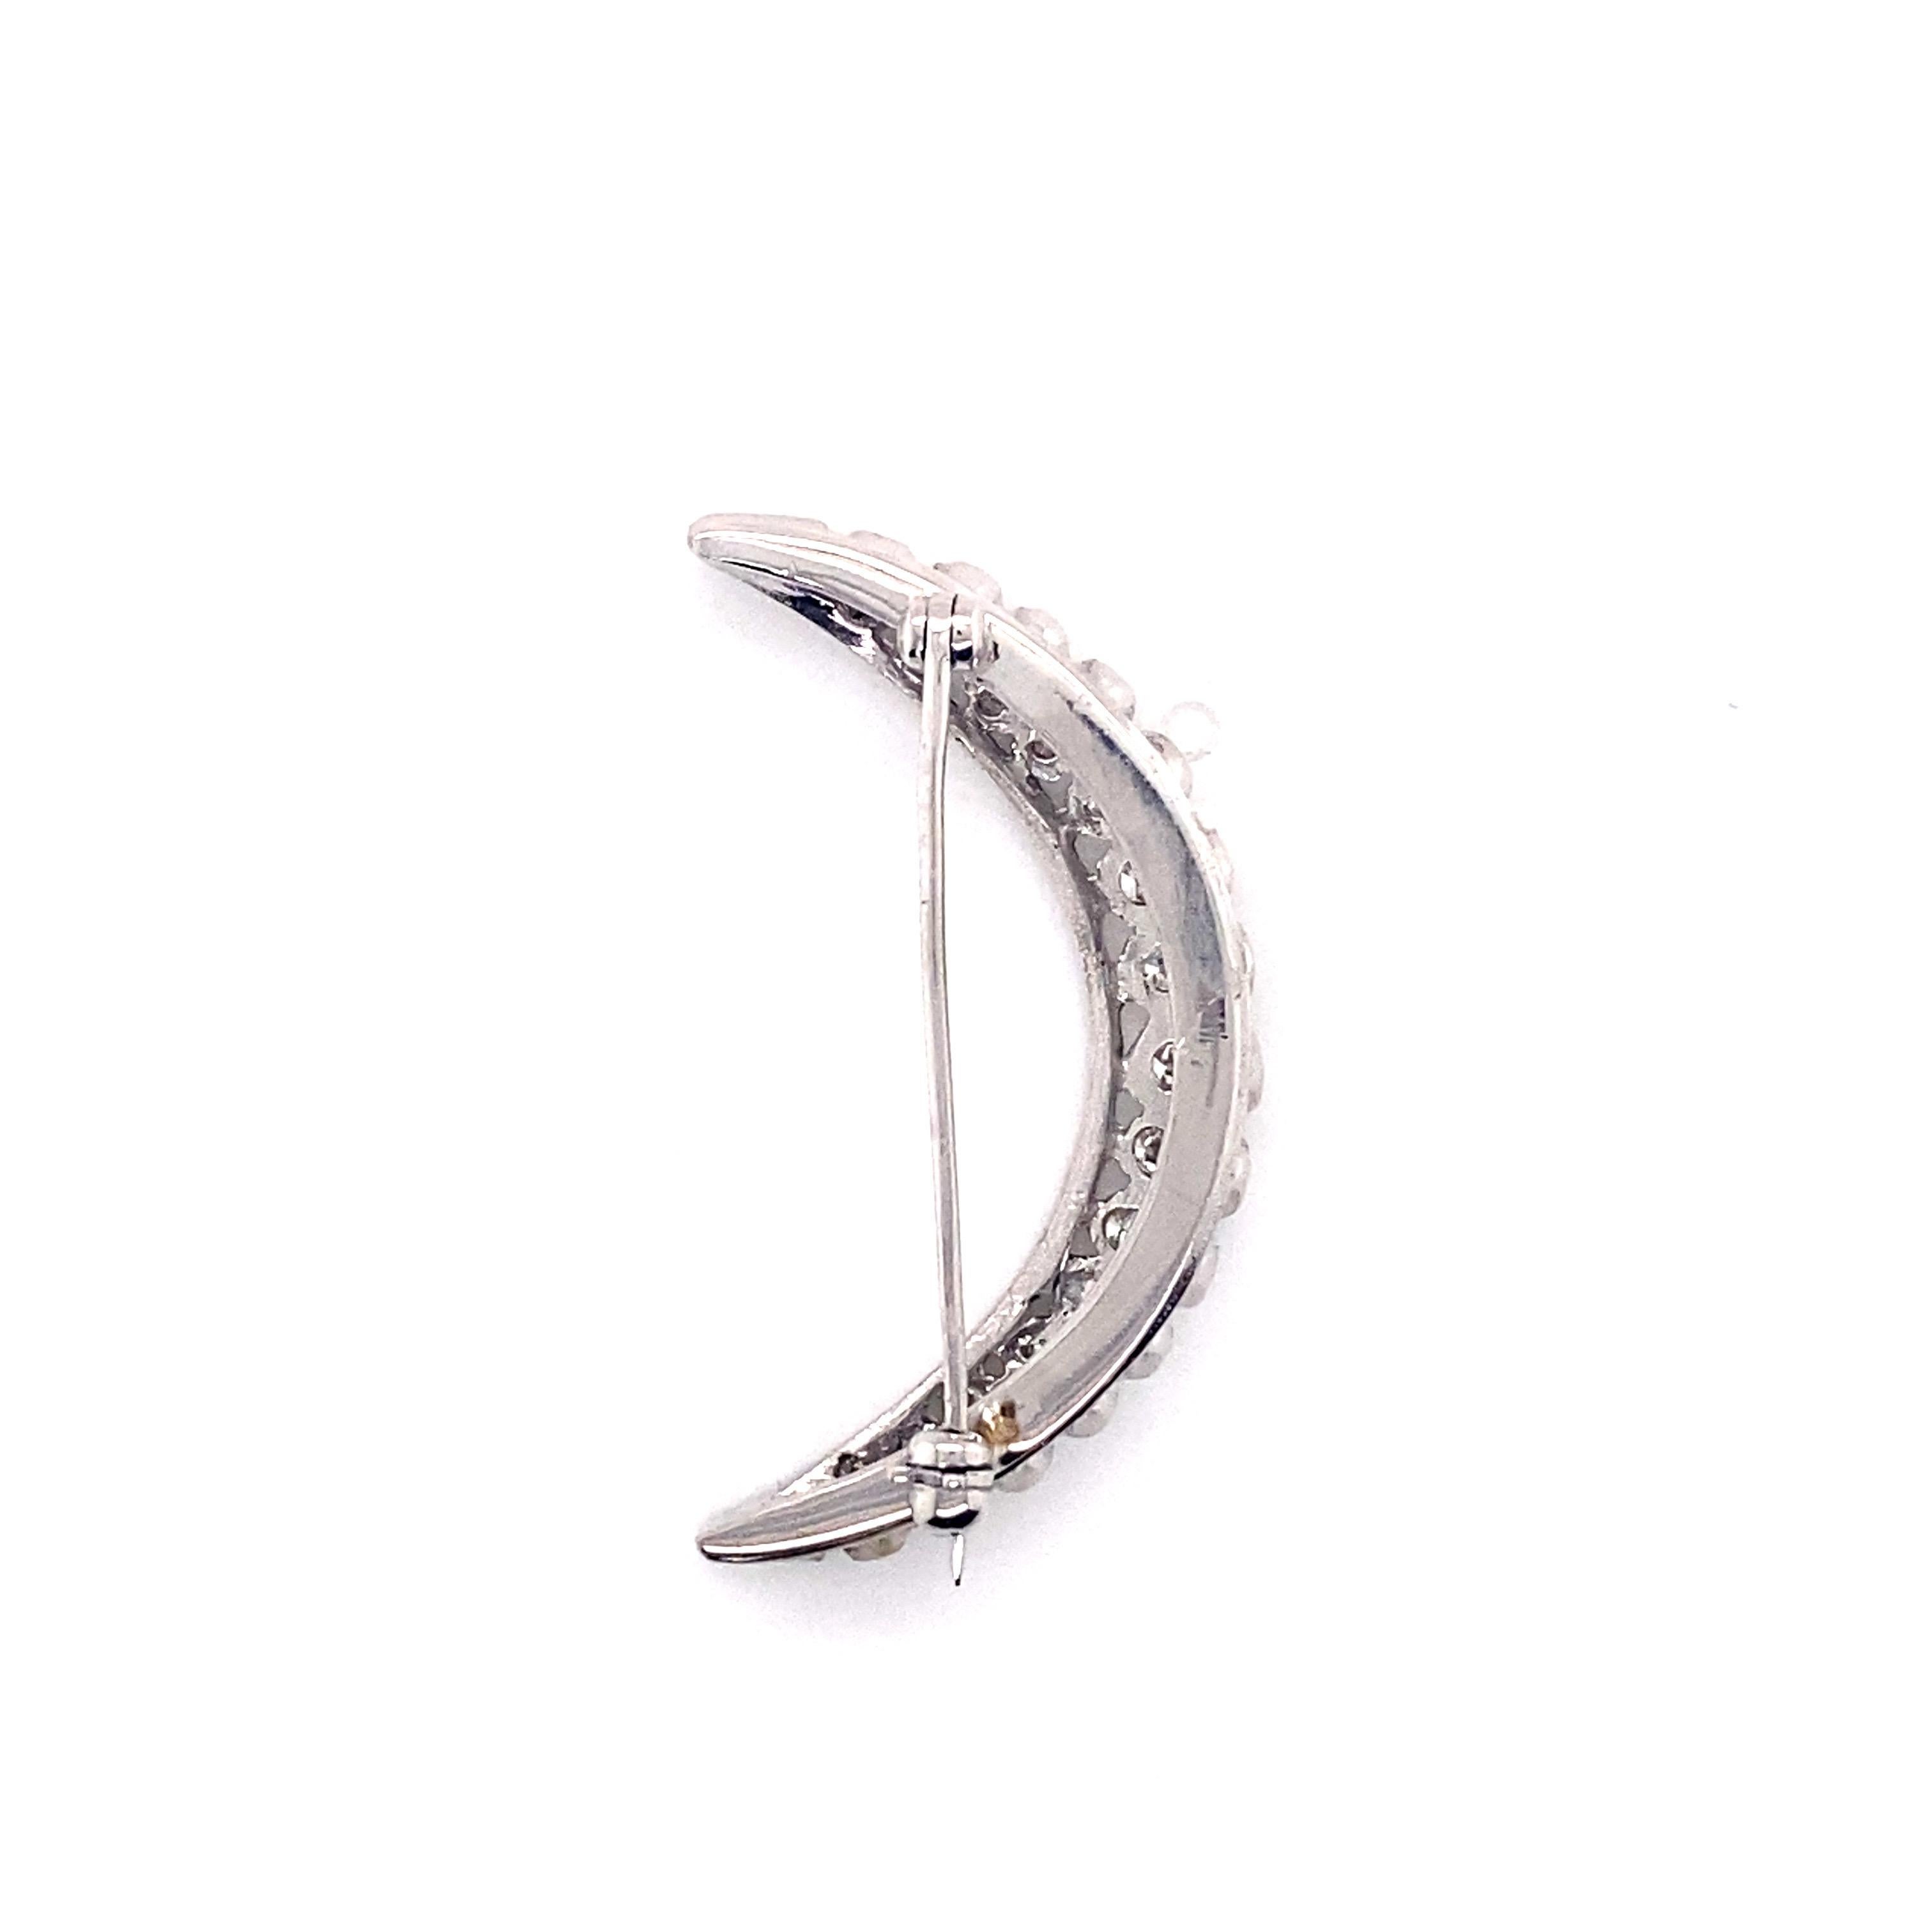 Vintage 1960’s Diamond Crescent Moon Pin. There are 15 round diamonds that graduate in size and weigh approximately .25ct with H - I color and VS2 - SI1 clarity. The crescent measures 1 3/8in tall by 3/4in wide and 1/5in thick, and has tulip designs